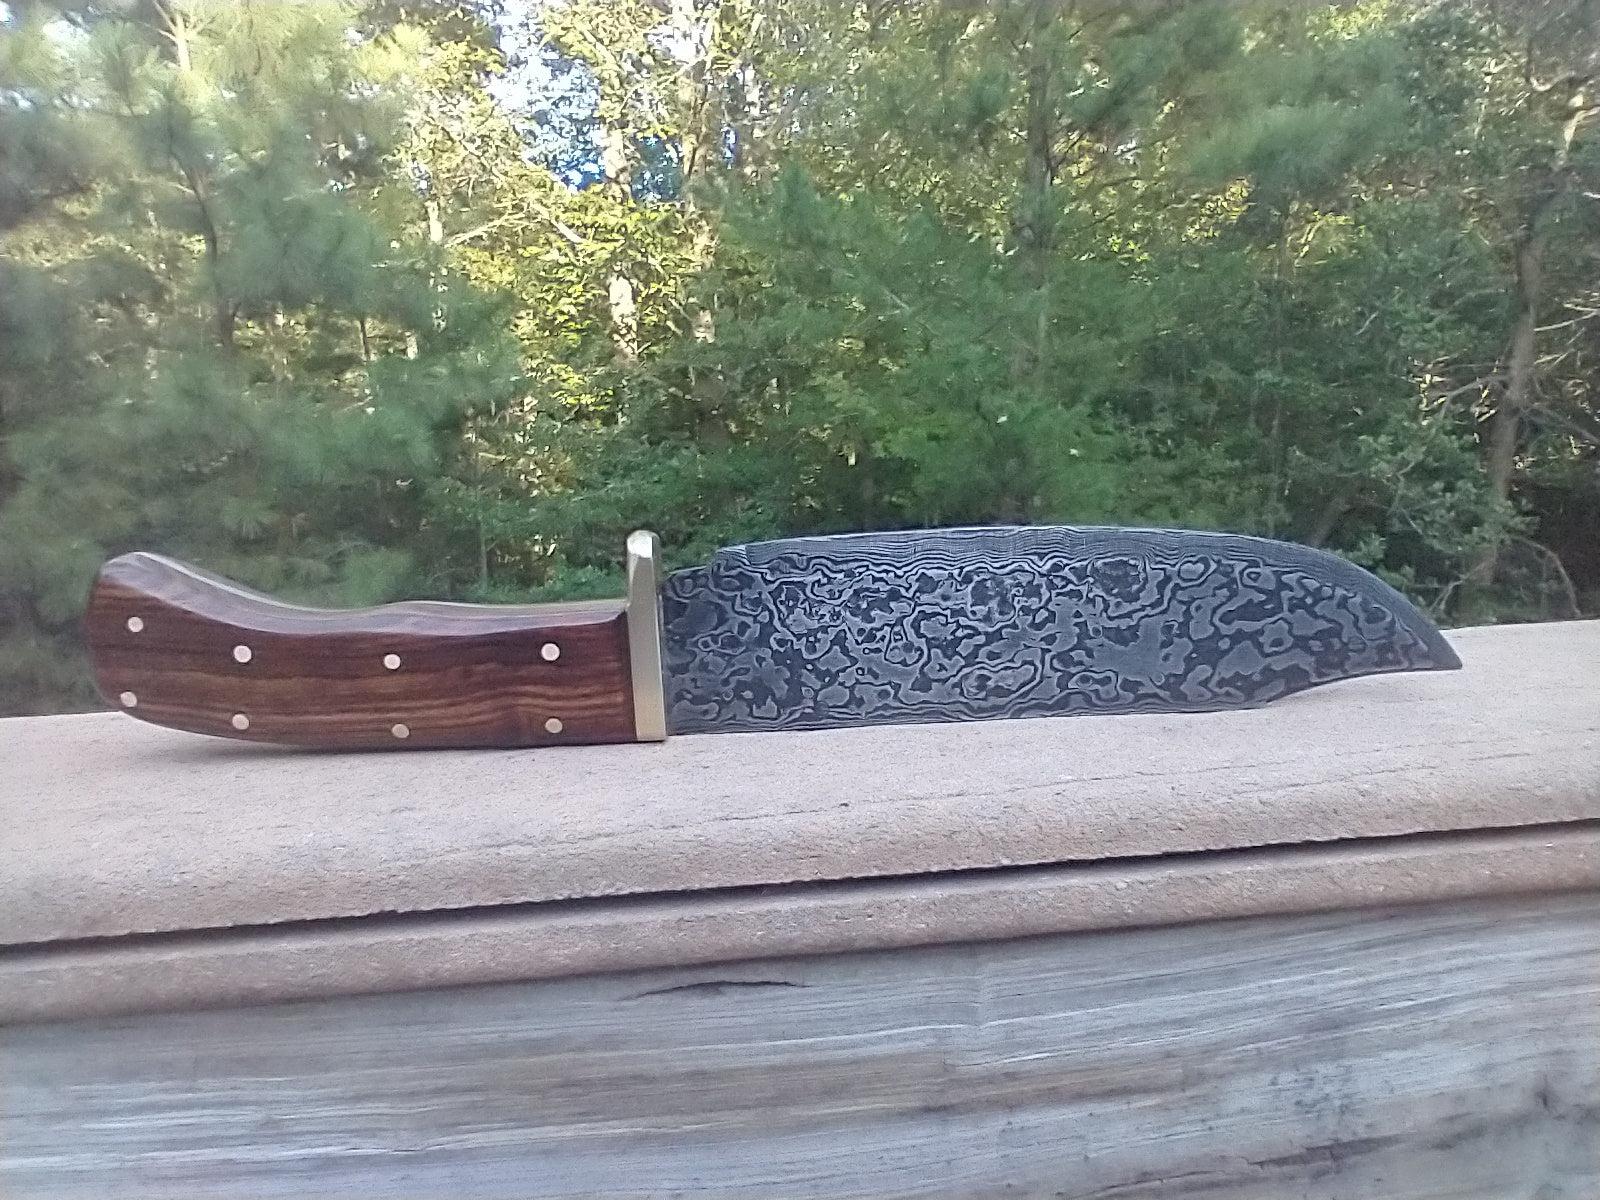 Promo Product Bowie knife